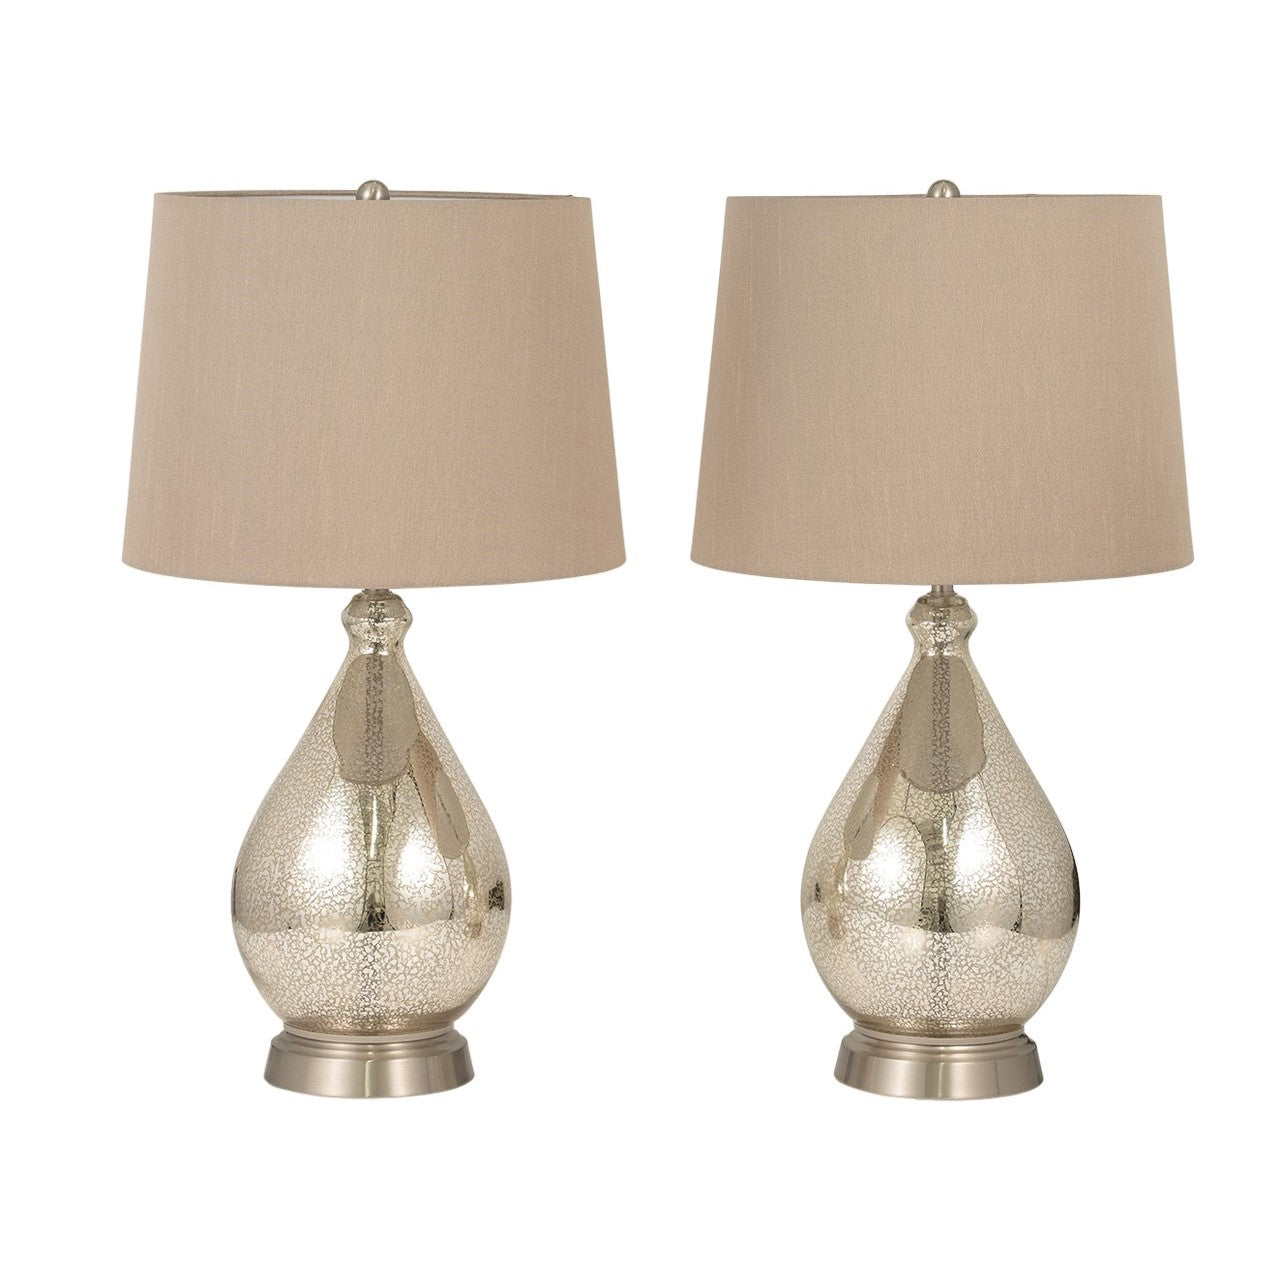 Picture of Mercury Glass Teardrop Table Lamps, Set of 2